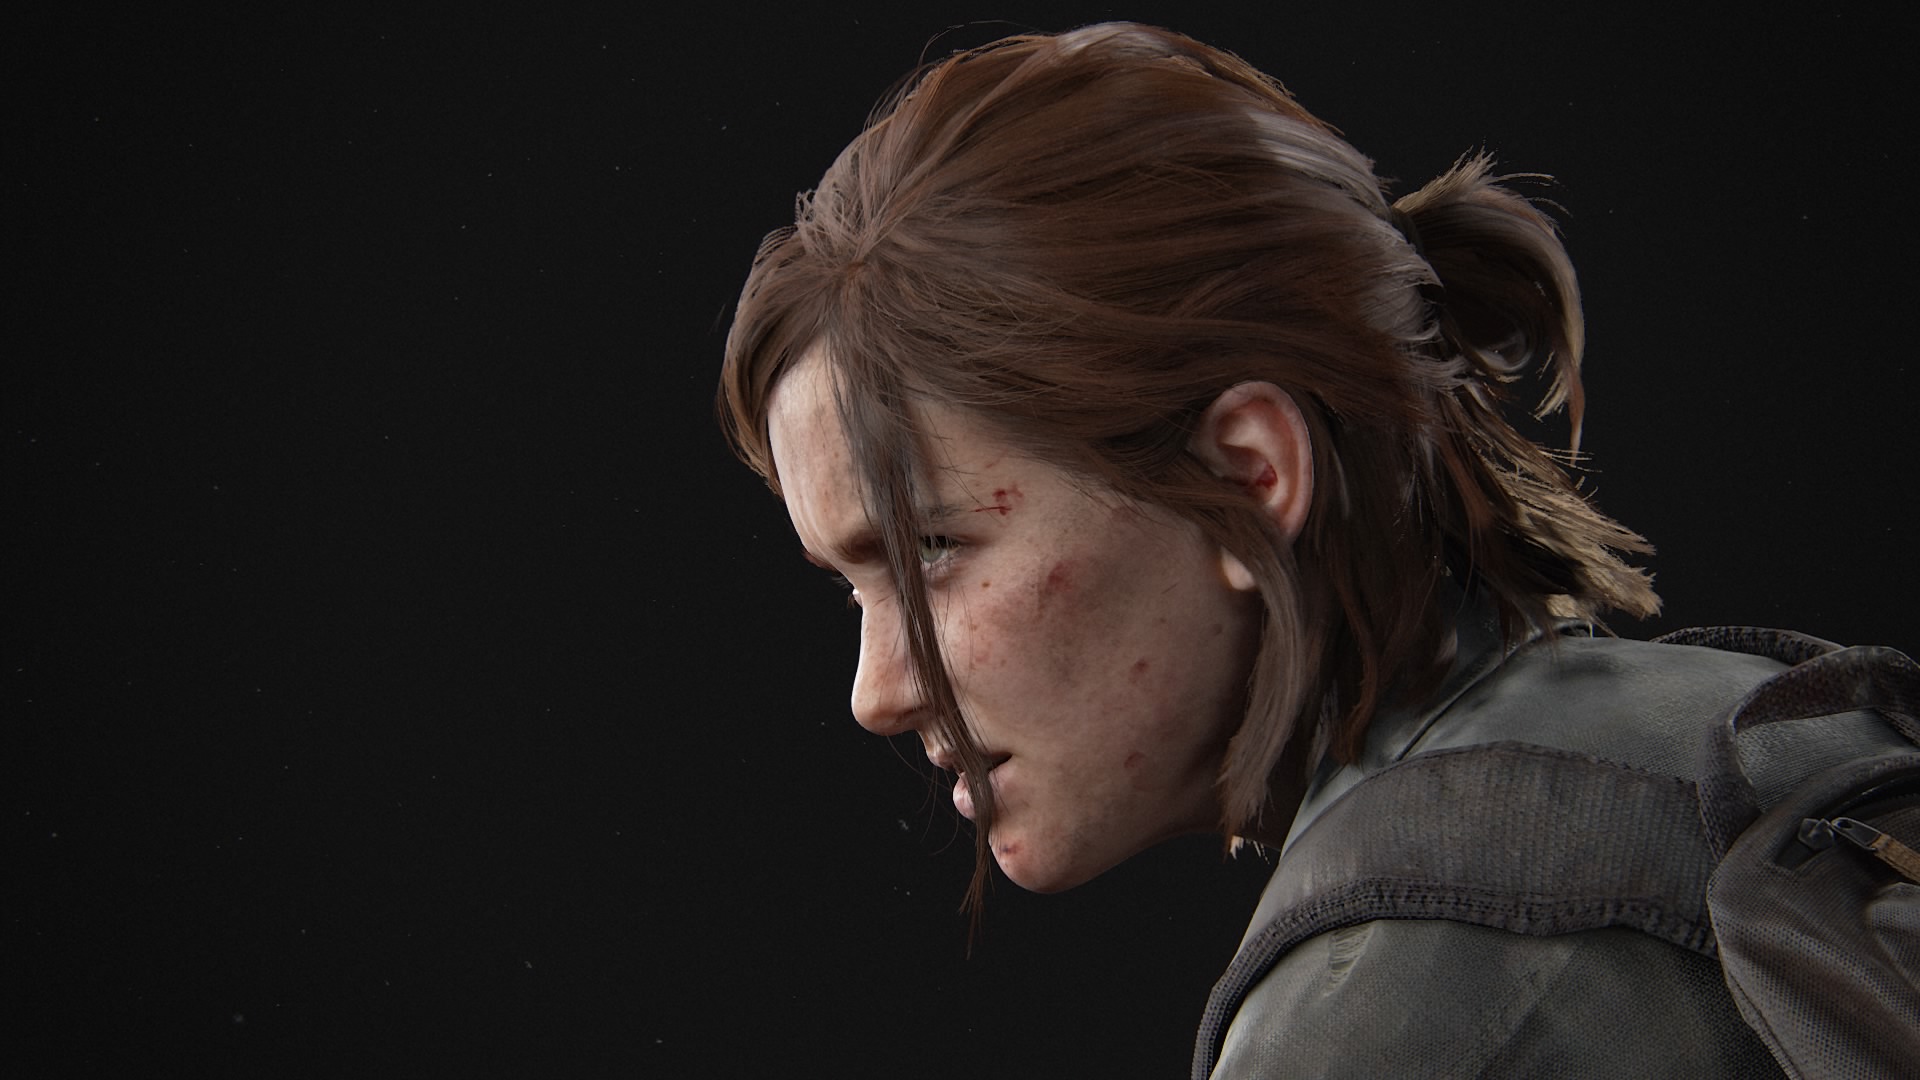 General 1920x1080 The Last of Us 2 PlayStation 4 Ellie Williams video game girls simple background video games video game characters Naughty Dog